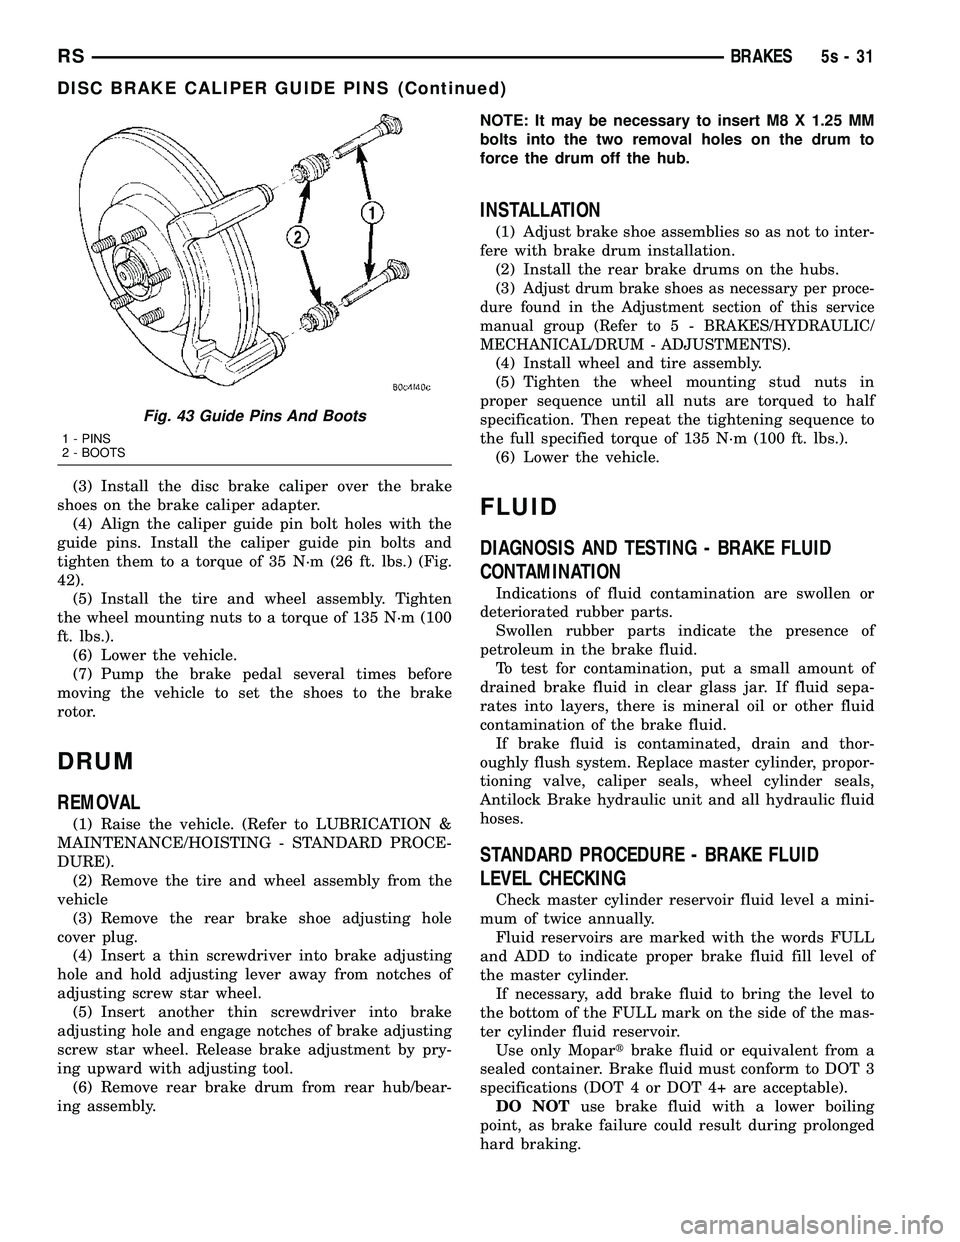 DODGE TOWN AND COUNTRY 2004  Service Manual (3) Install the disc brake caliper over the brake
shoes on the brake caliper adapter. (4) Align the caliper guide pin bolt holes with the
guide pins. Install the caliper guide pin bolts and
tighten th